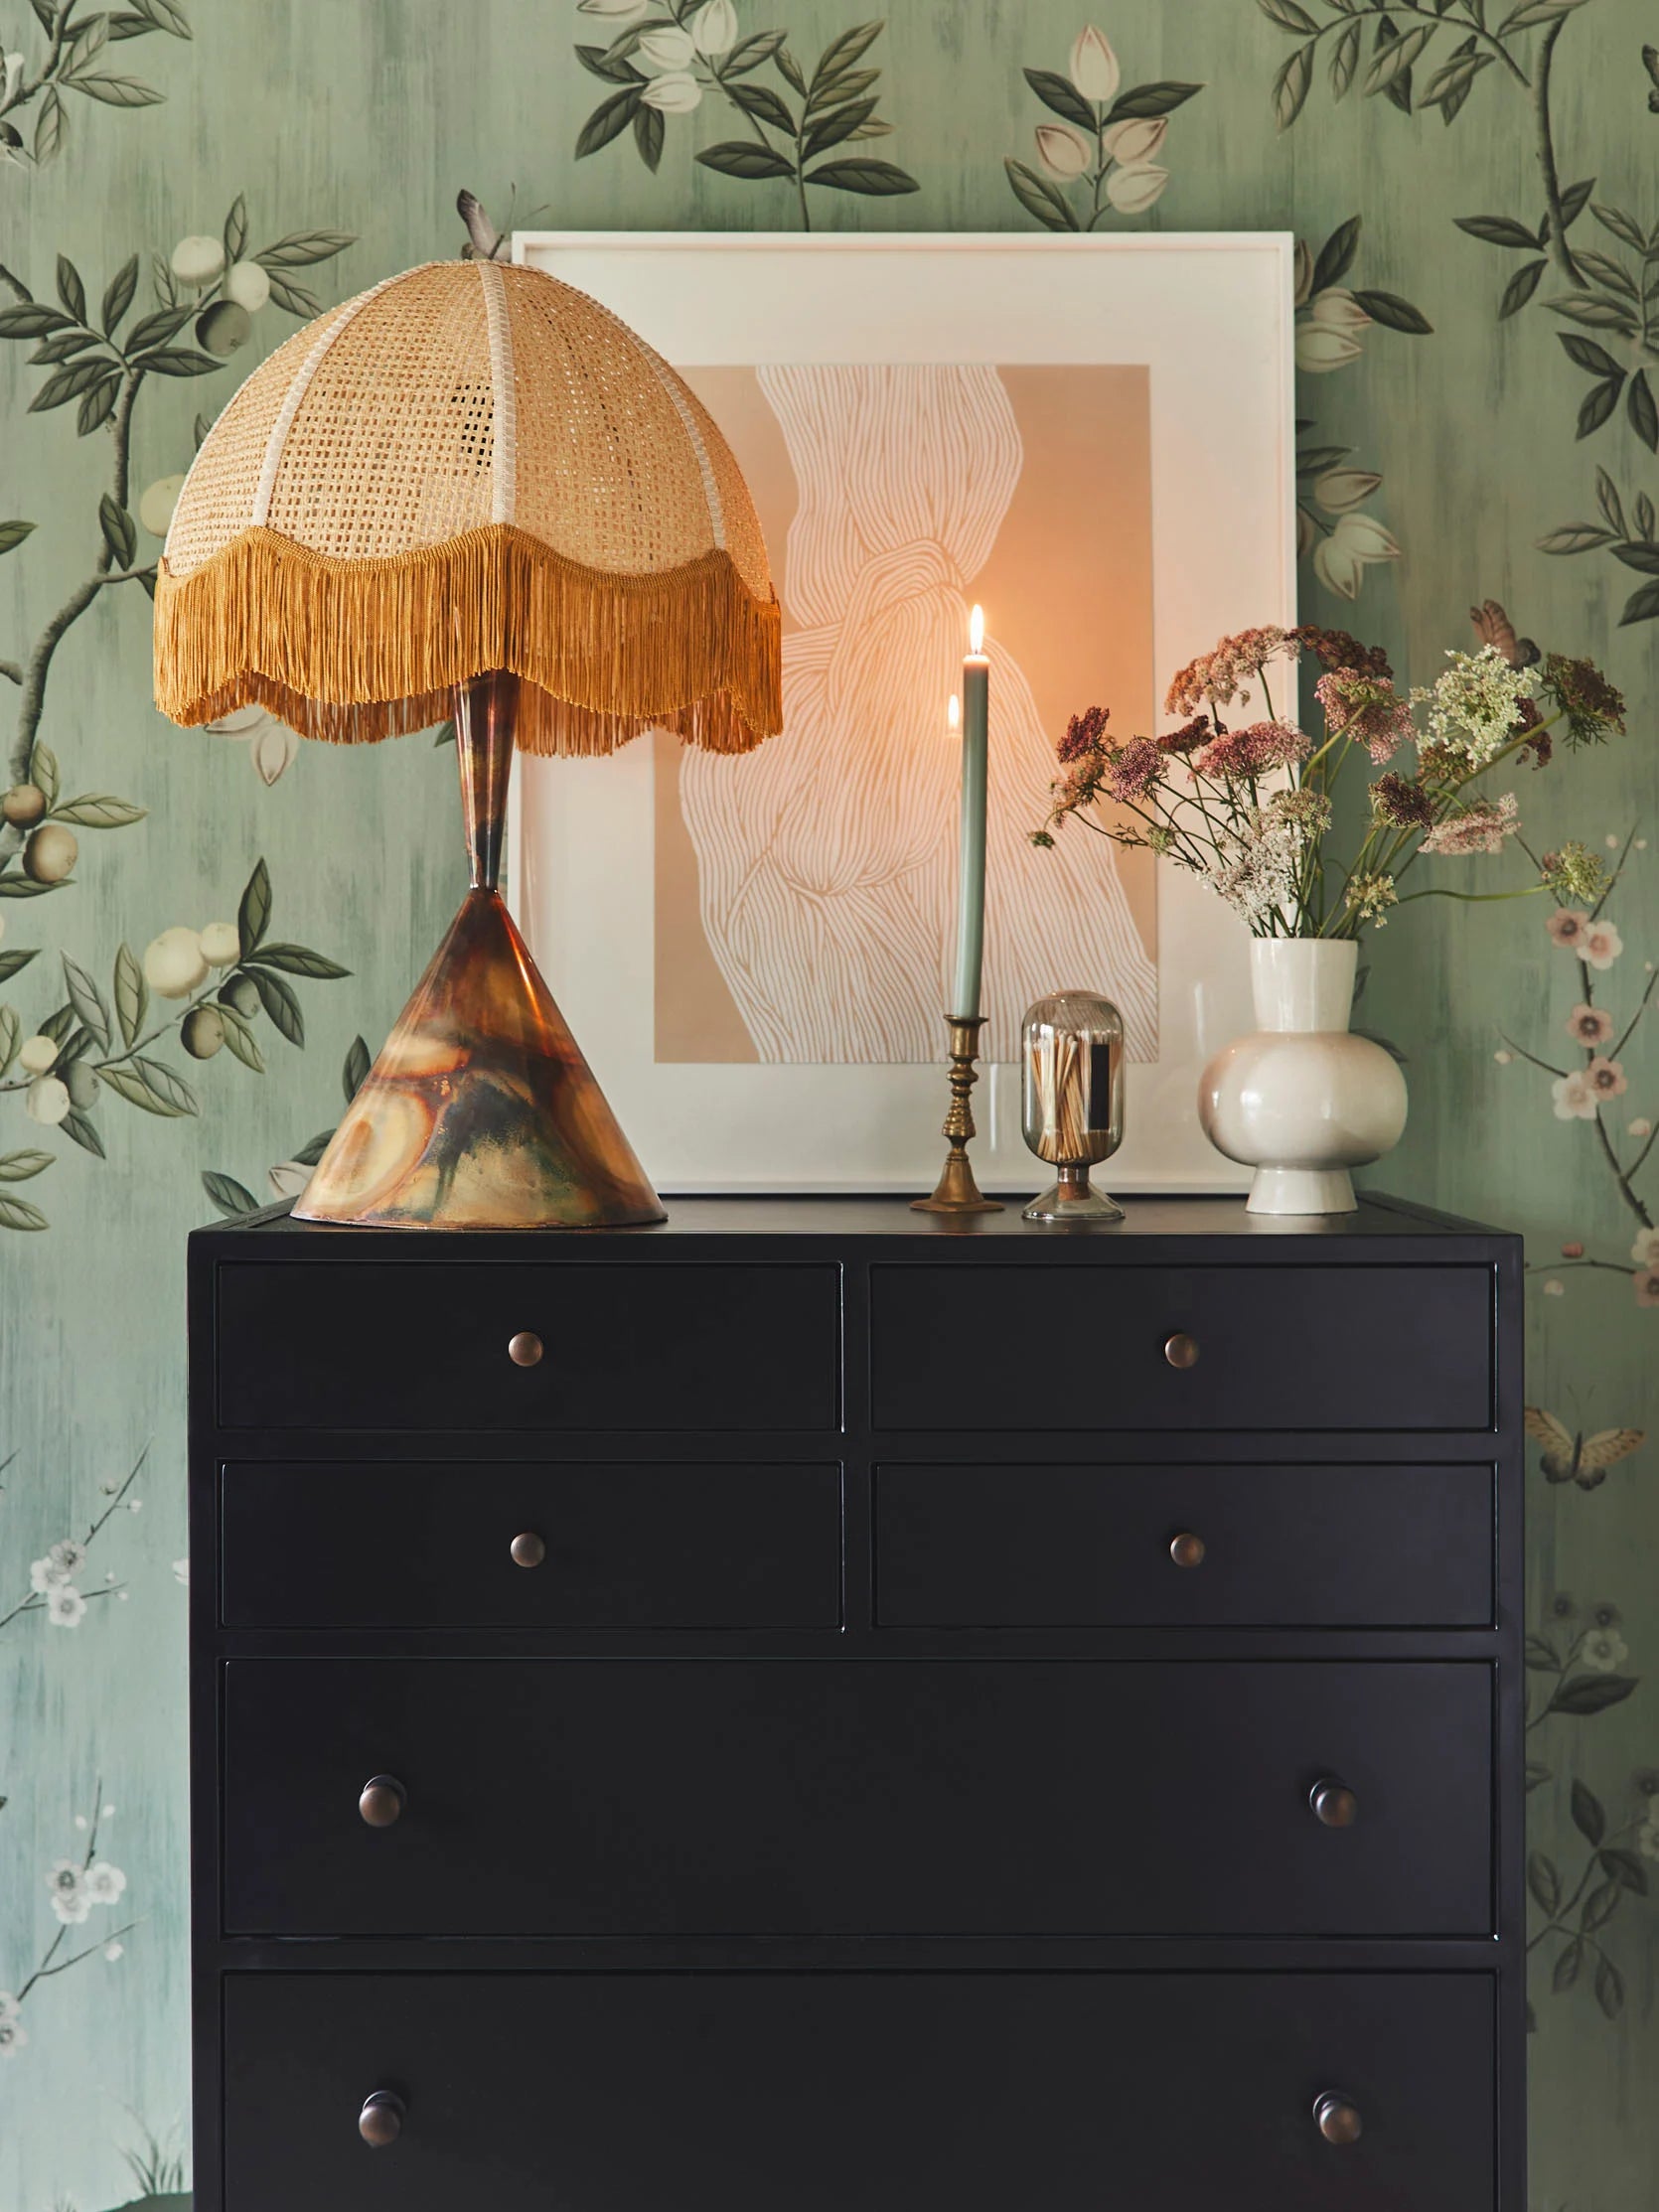 Maximalist home decor. Set of dark wood draws with a lamp, candle, ornaments, and art print on top in front of green chinoiserie wallpaper.